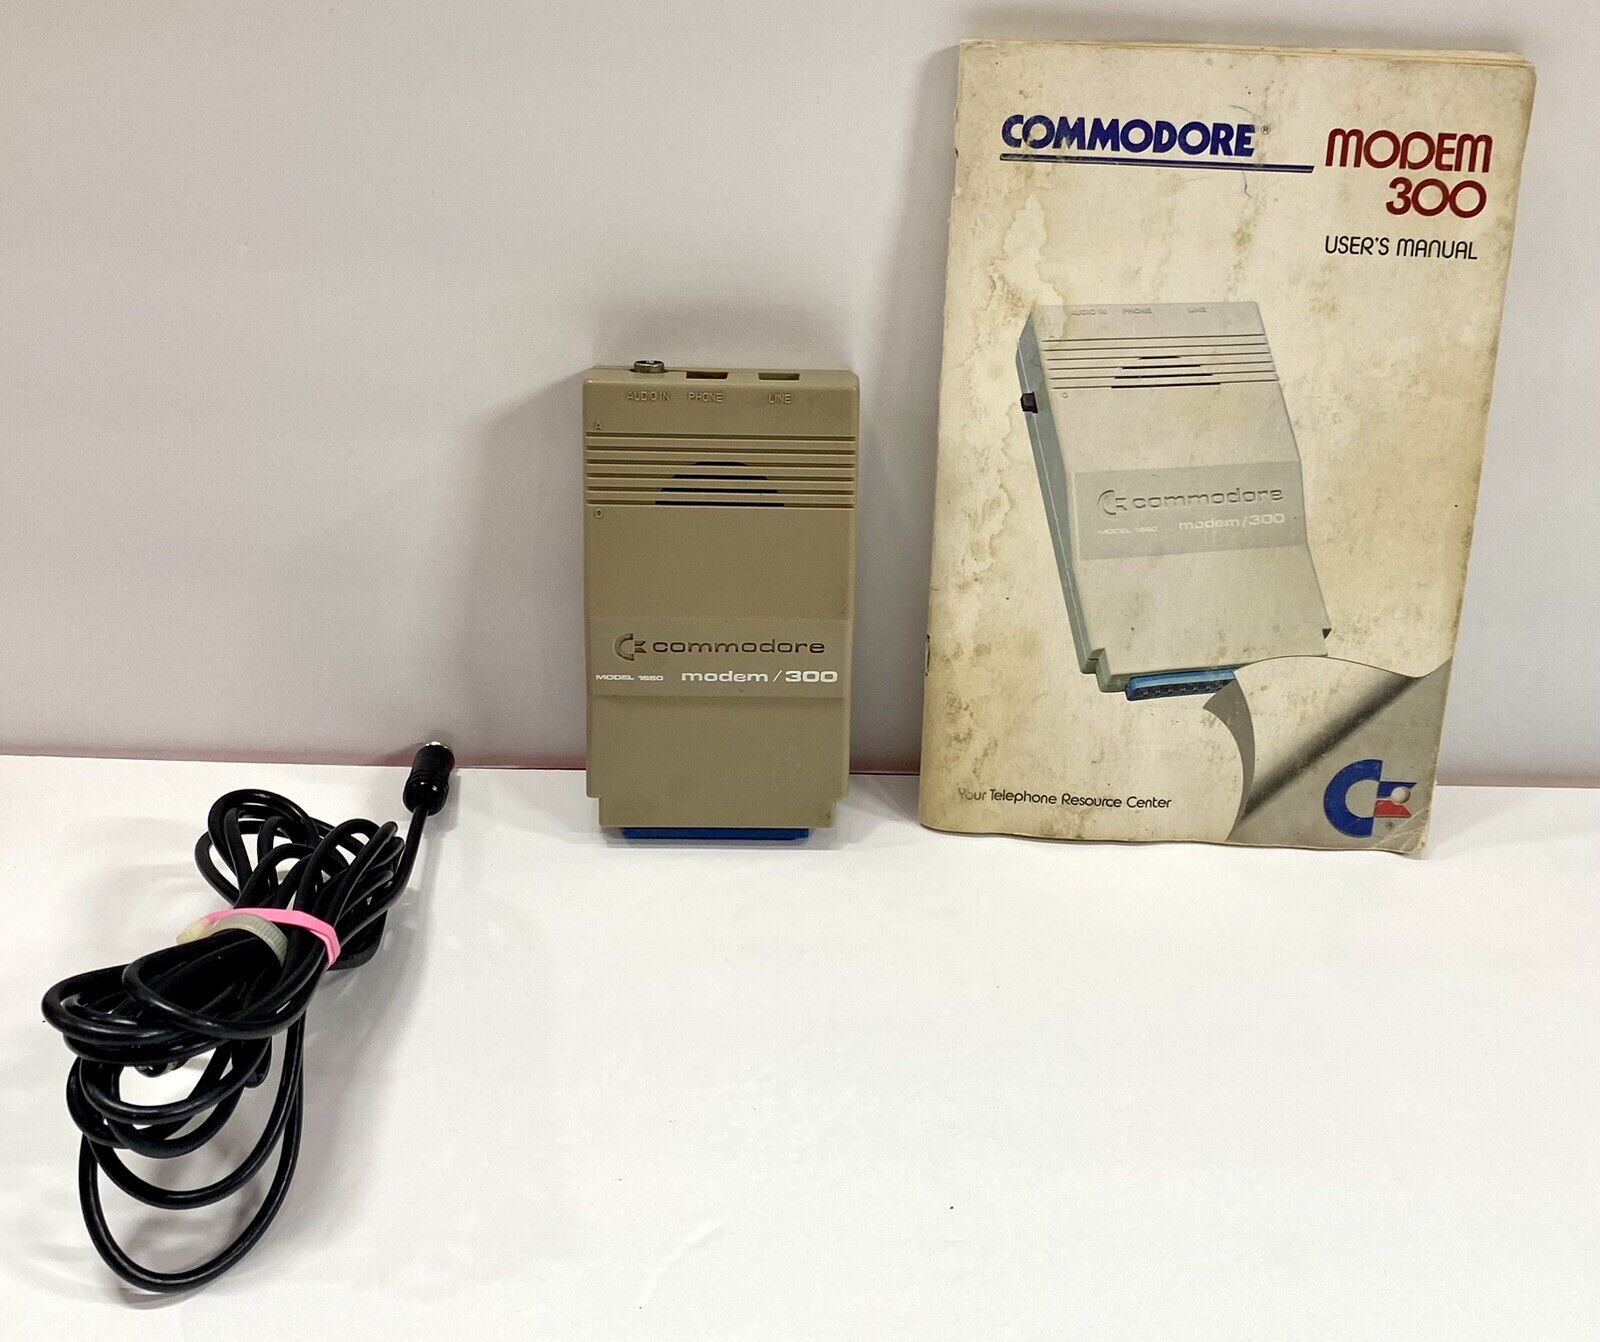 Vintage Commodore 1660 Modem 300 C64 W/Manual and Cable Untested - A8